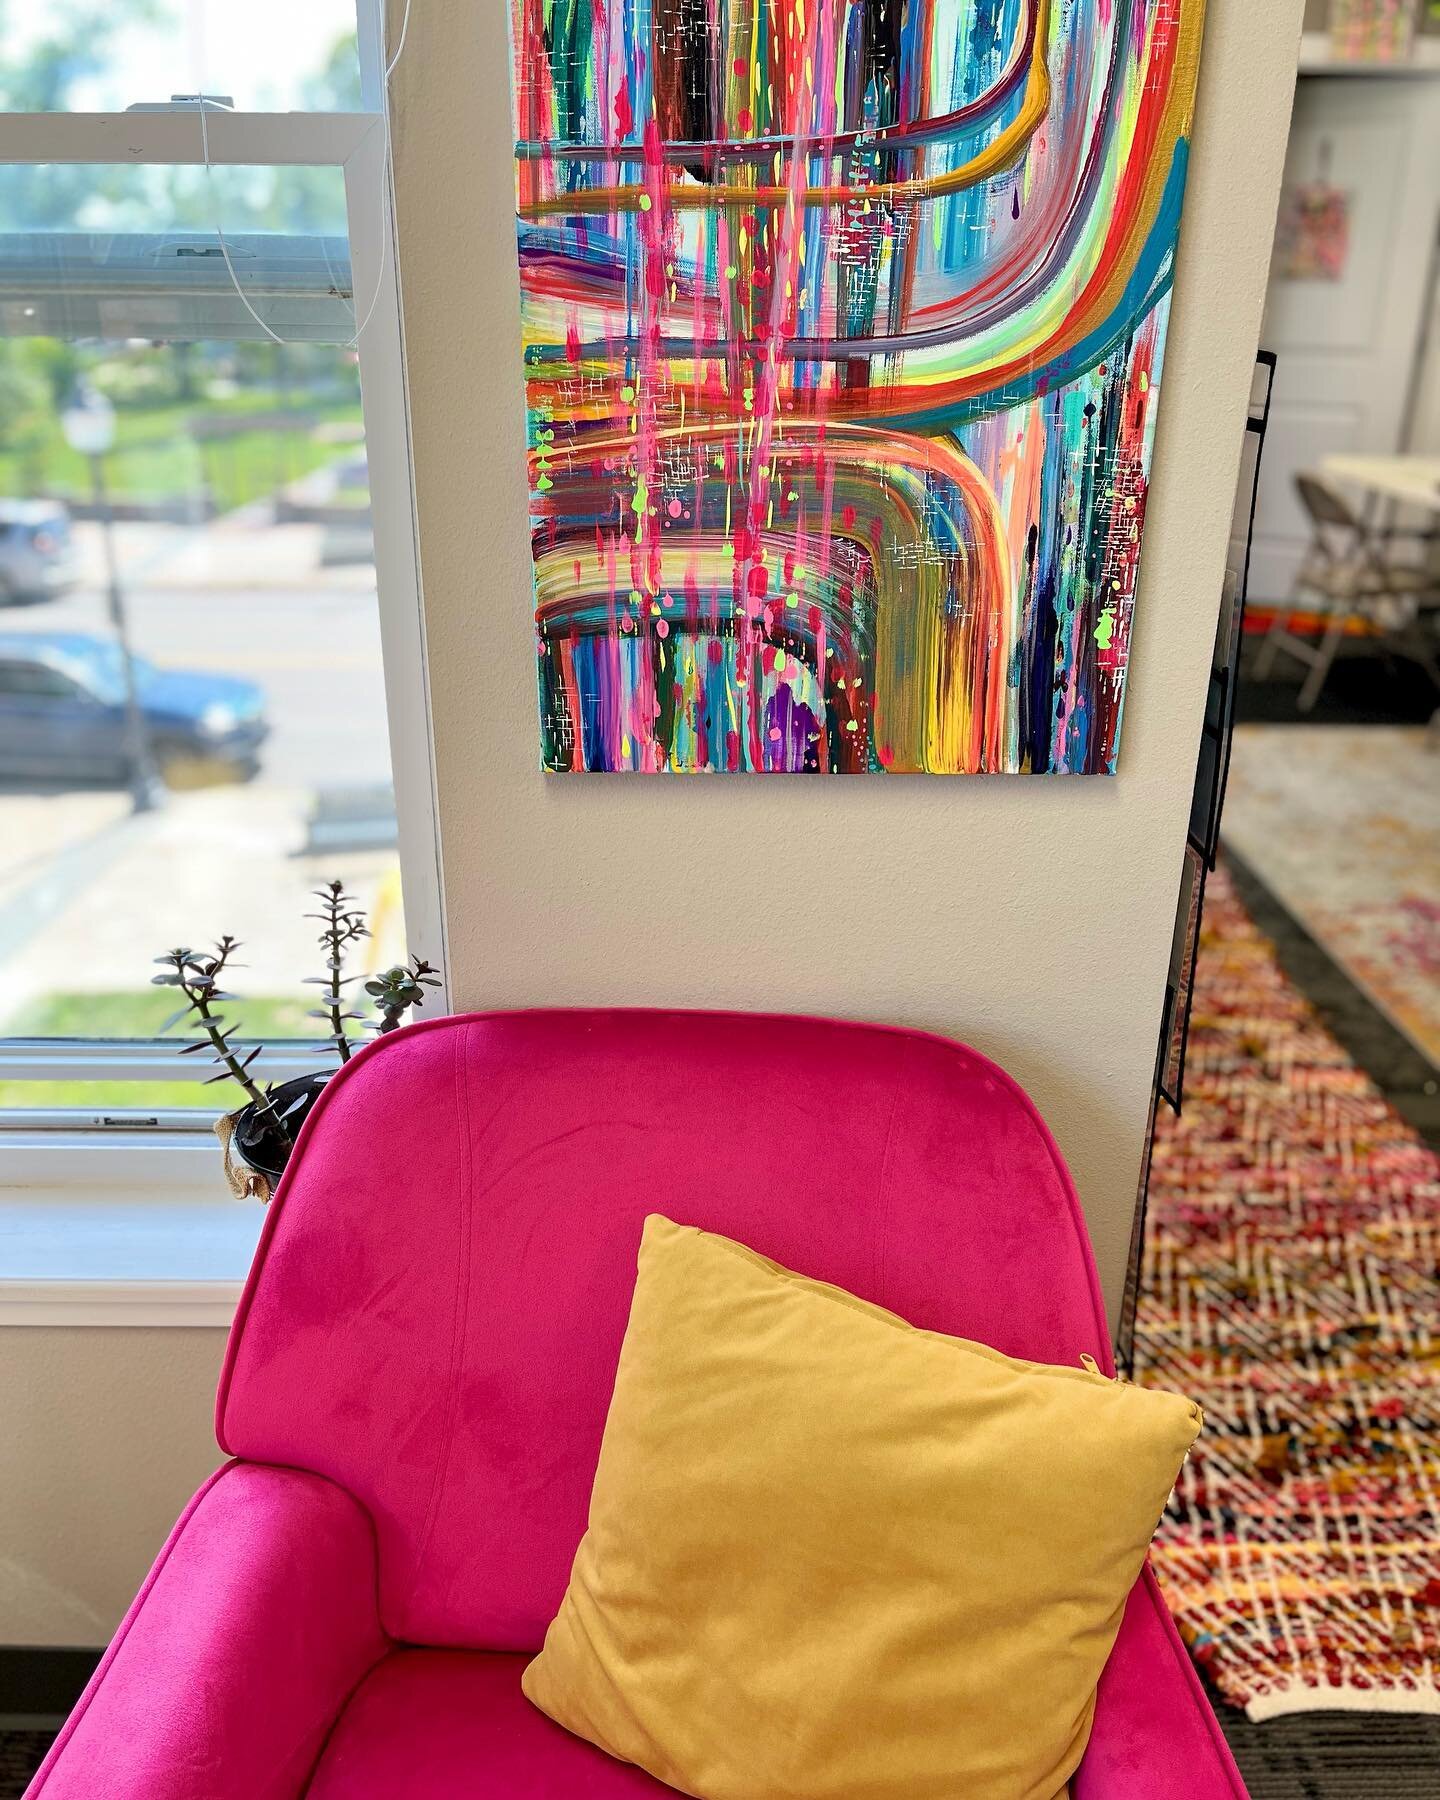 16&rdquo;x20&rdquo; Vibrant abstract stretch canvas that needs a name&hellip;let&rsquo;s call her &ldquo;Wendy.&rdquo; A steal at $50. One of a kind. First come, first serve. Message me if Wendy needs to come home with you. 
#eichenpaint #art #painti